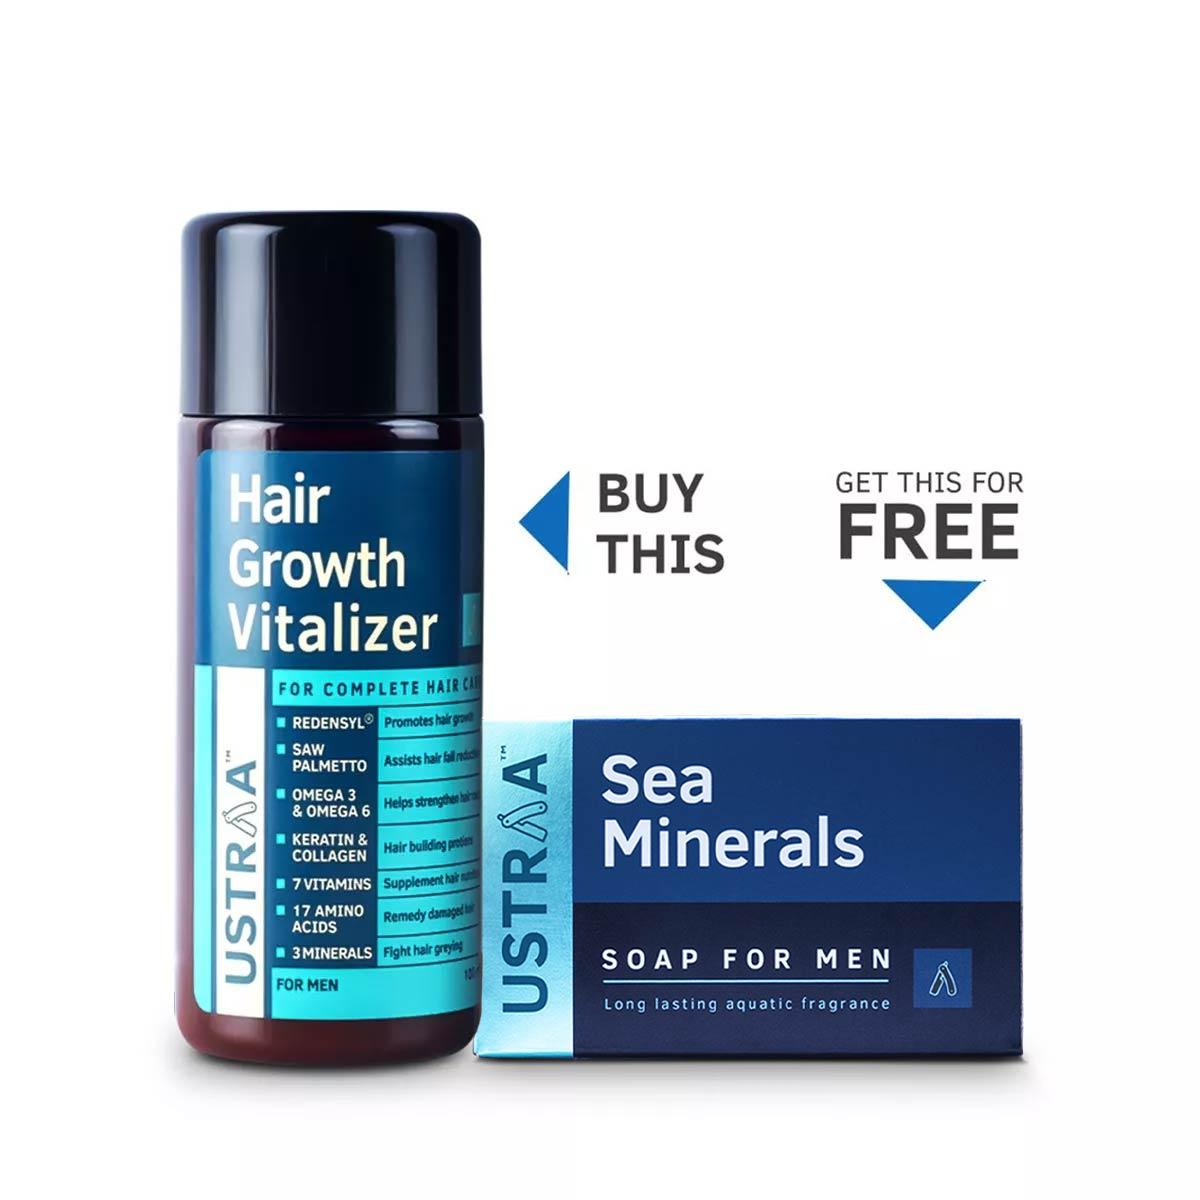 Ustraa Hair Growth Vitalizer With Saw Palmetto, Redensyl, Vitamins: Get Sea Mineral Deo Soap For Free